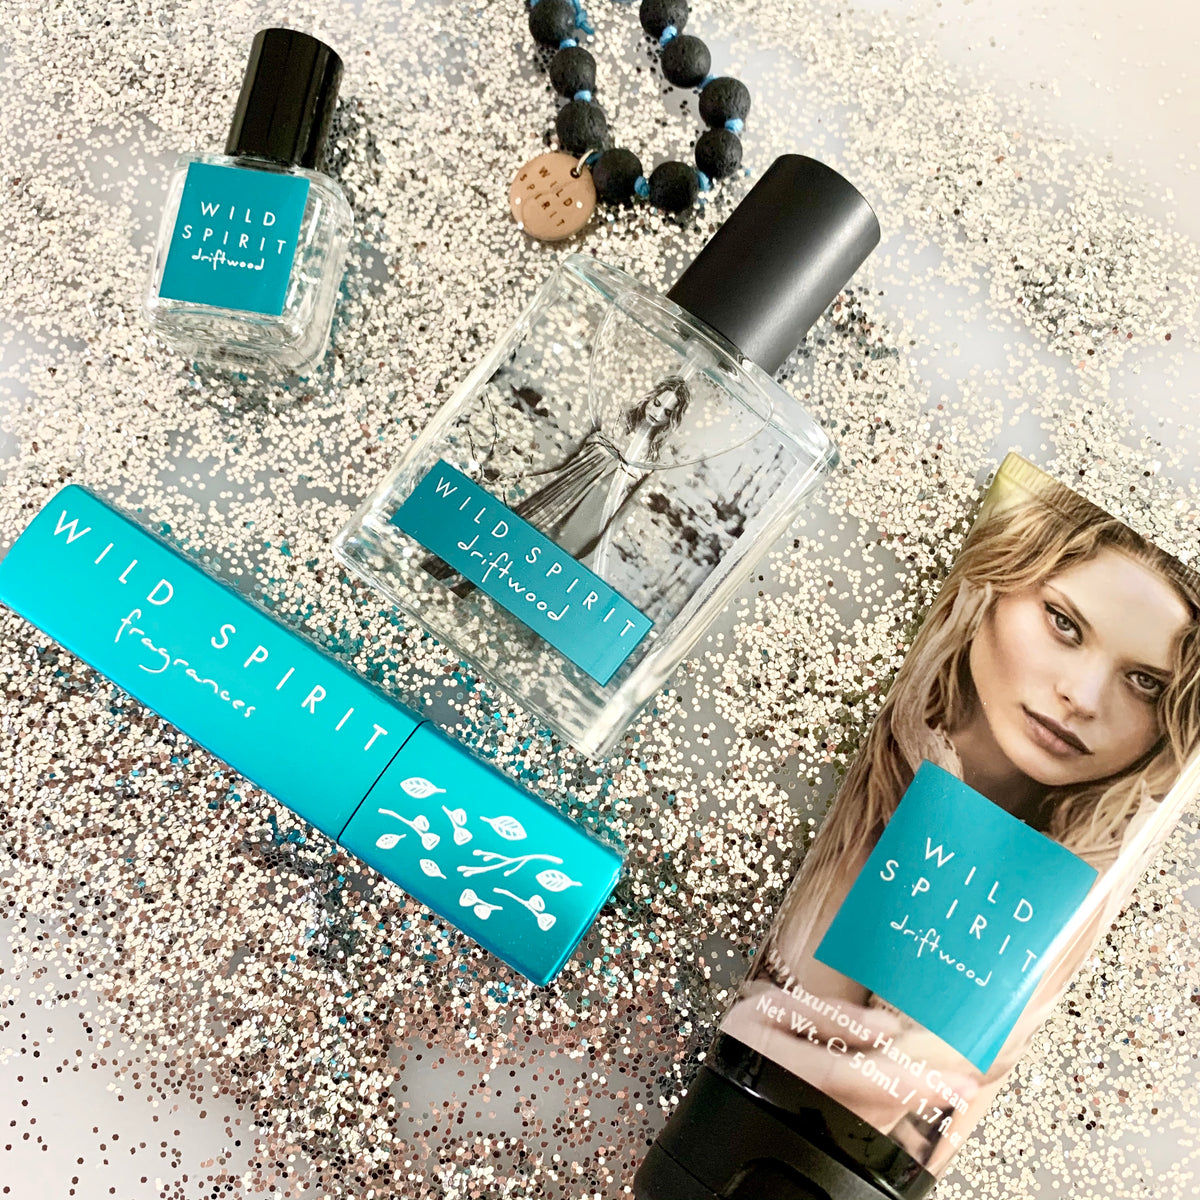 Looking for the perfect gift for your minimalist, beachy bestie? We’ve got you covered. The Driftwood Lovers Perfume Gift Set gives you Driftwood vibes whenever and wherever you need a little fresh and airy touch-up. With salty ocean notes highlighted by a star jasmine signature enhanced with specialty mint notes, this scent is the epitome of fresh and FABULOUS without even trying